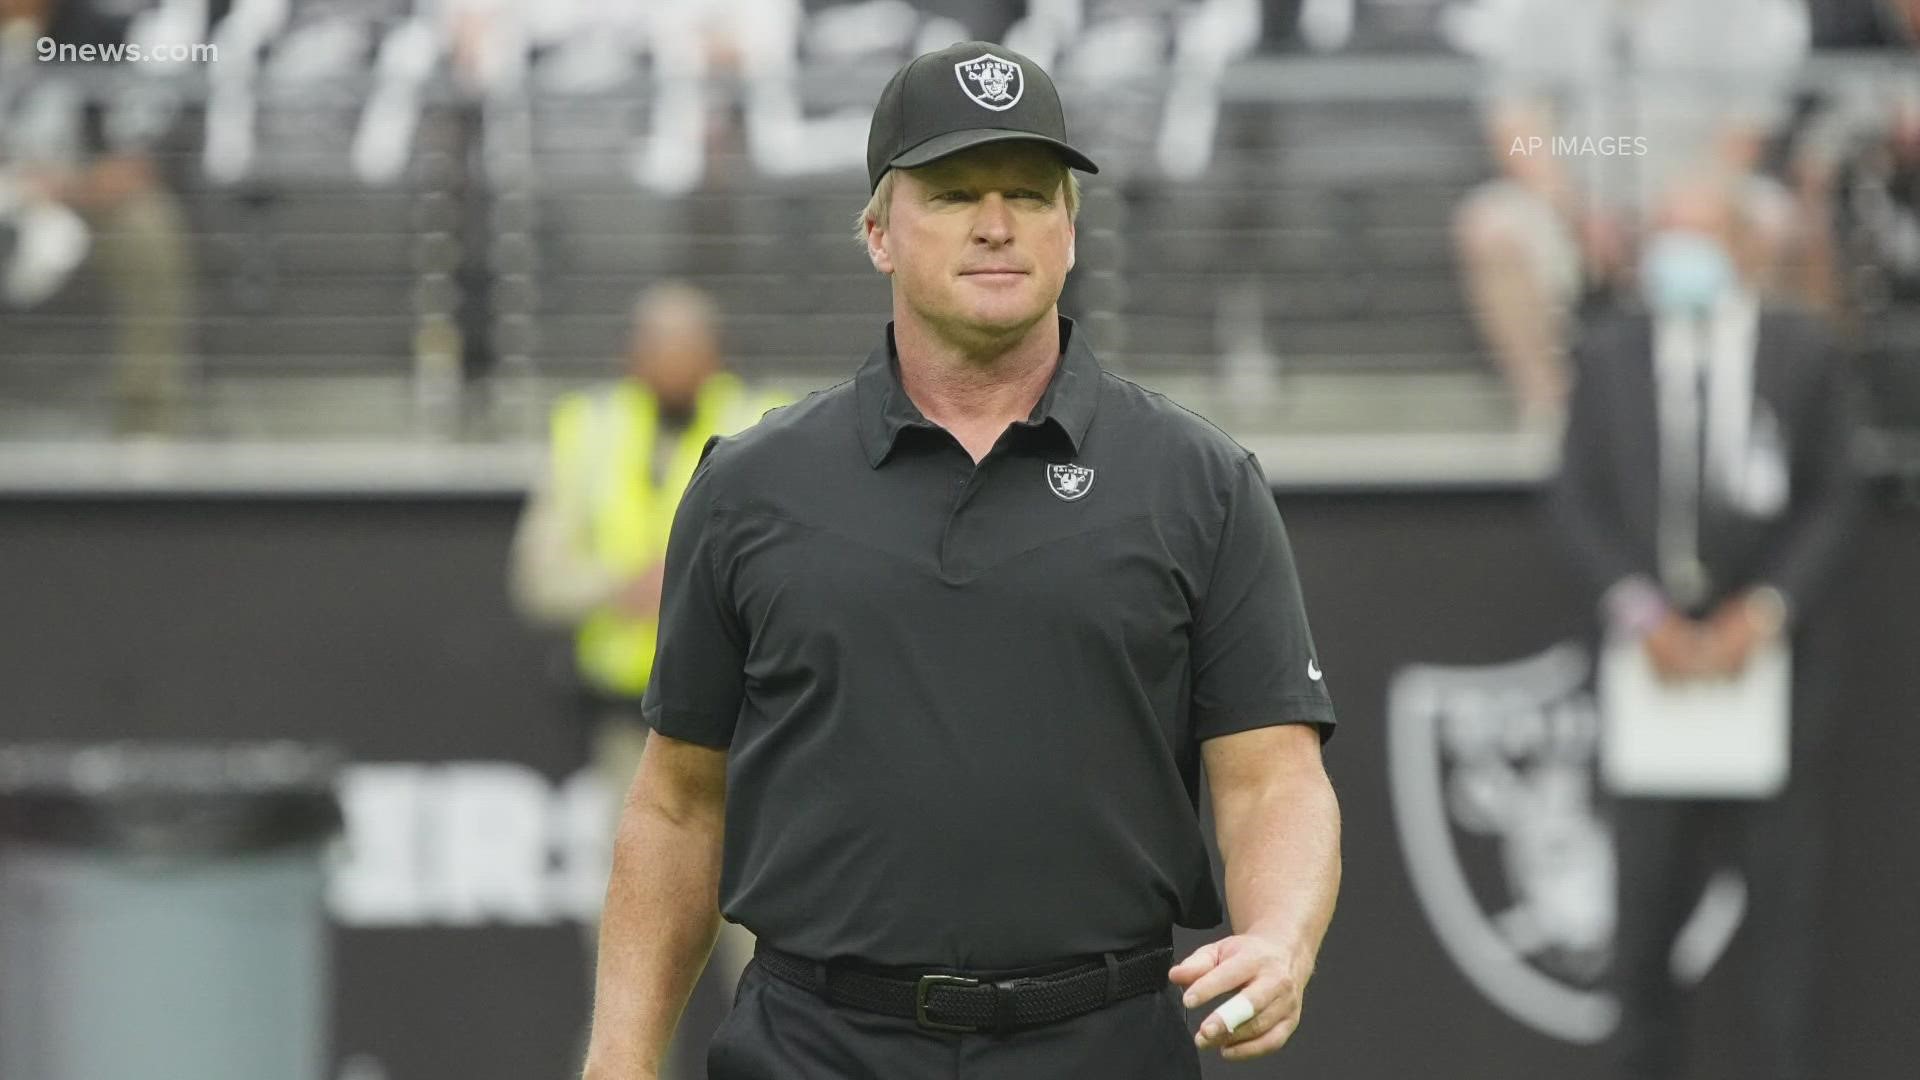 The New York Times reported Monday Gruden frequently used misogynistic and homophobic language directed at NFL Commissioner Roger Goodell and others.